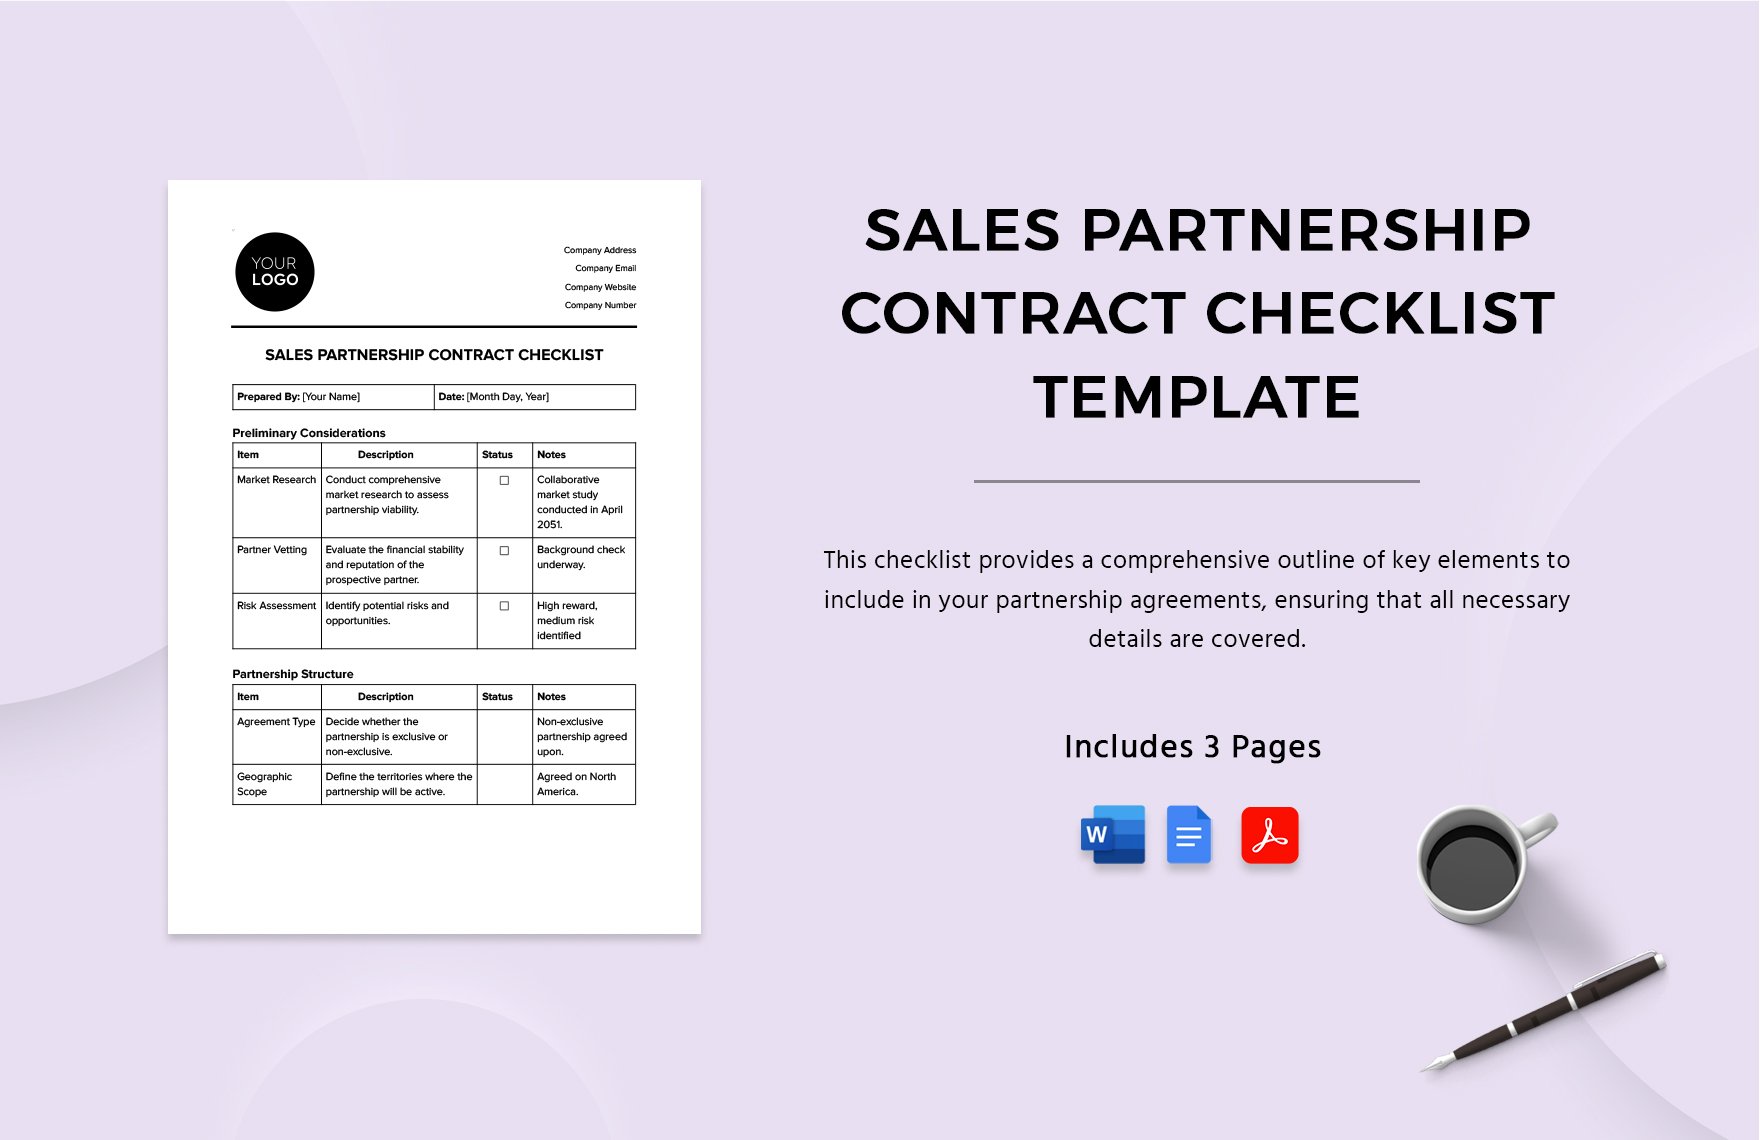 Sales Partnership Contract Checklist Template in Word, Google Docs, PDF